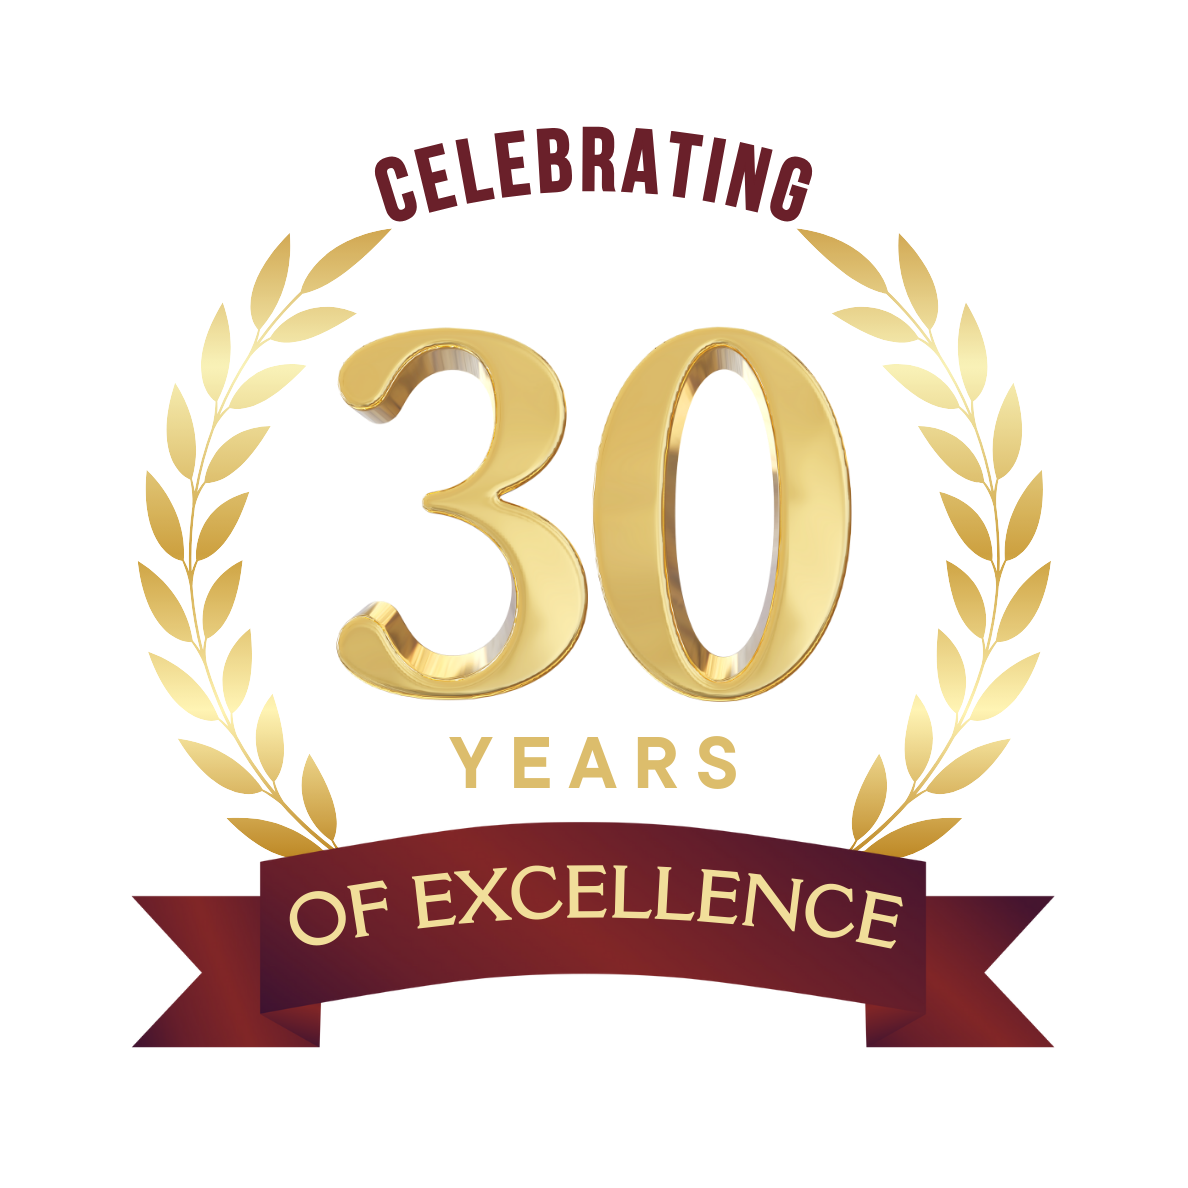 Celebrating 30 years of excellence